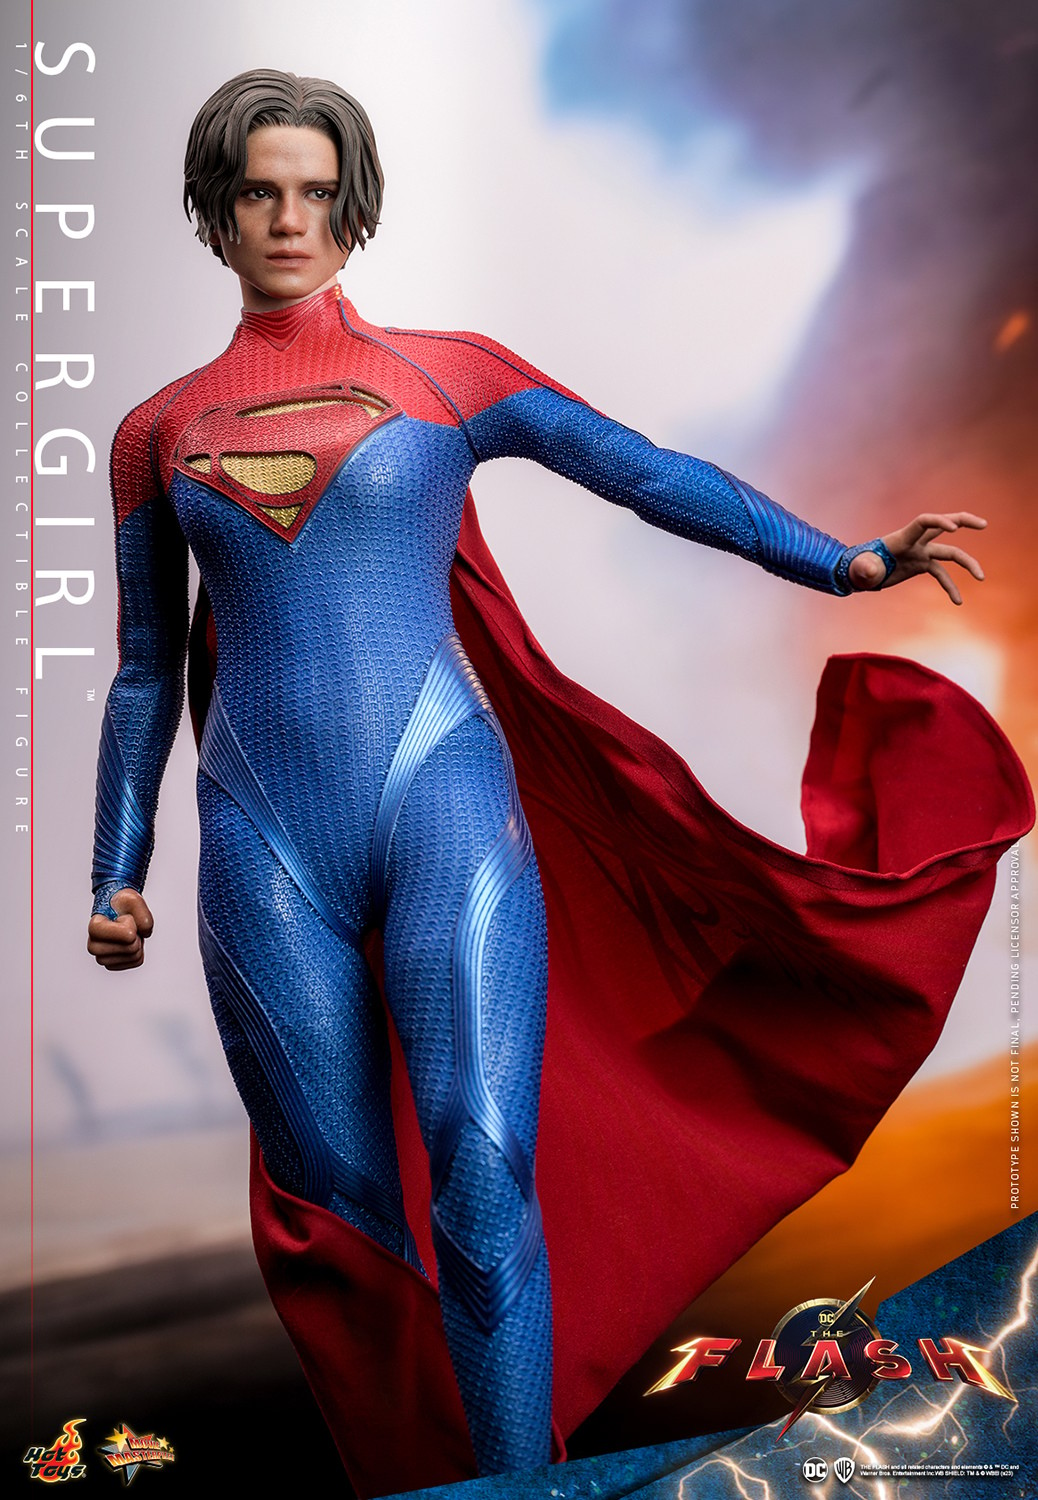 Better close-ups of Hot Toys' Supergirl at their Taipei Event. : r